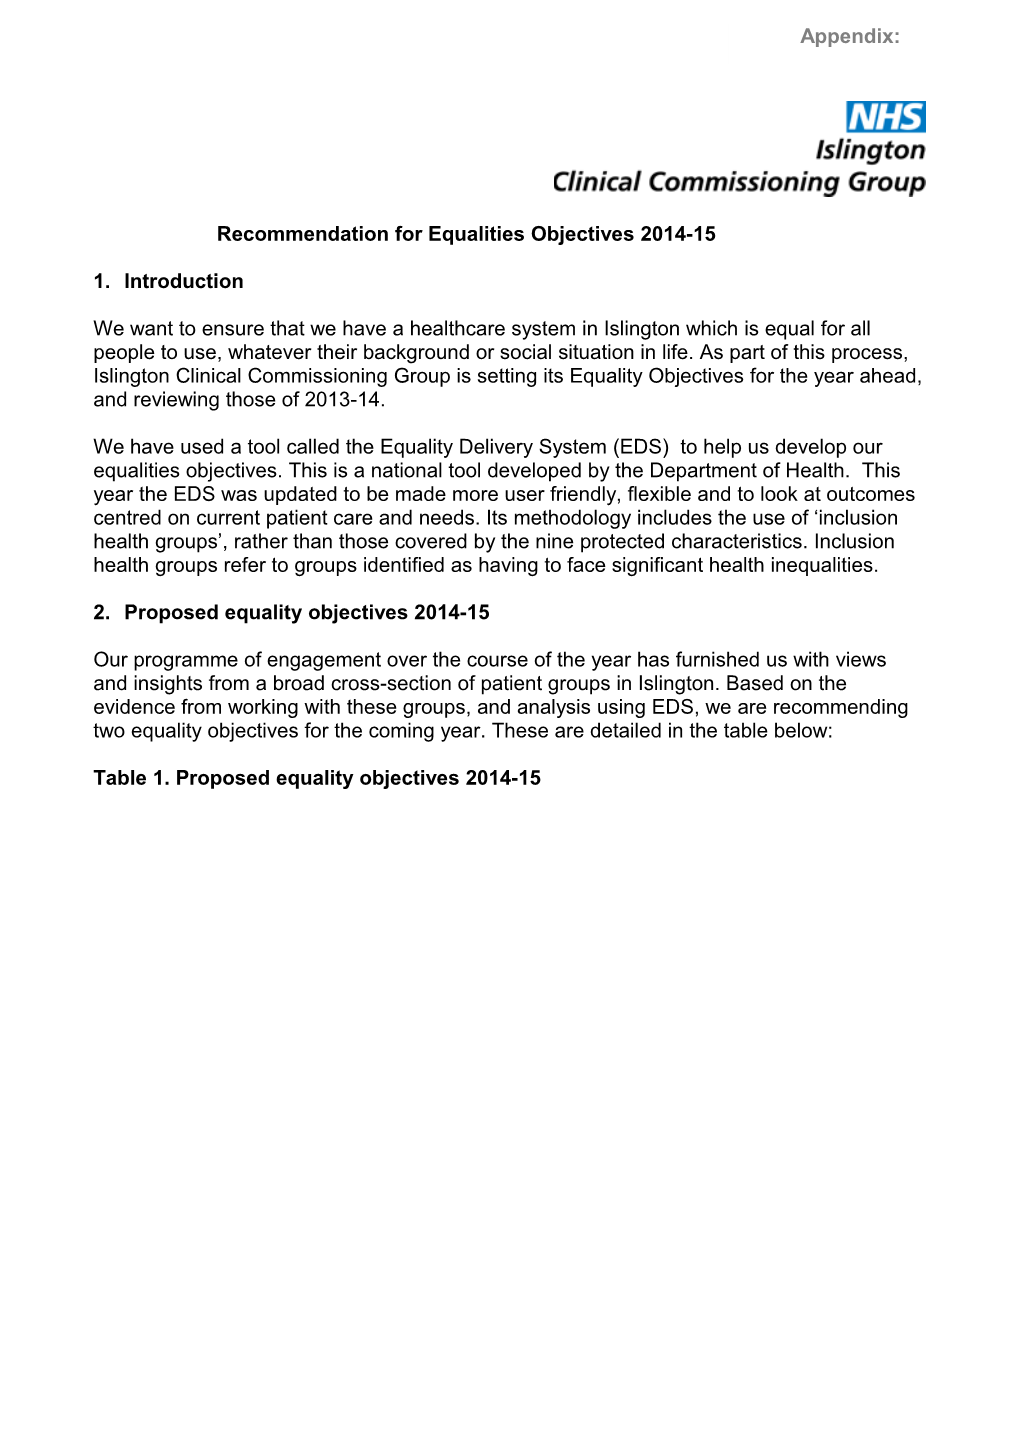 Recommendation for Equalities Objectives 2014-15